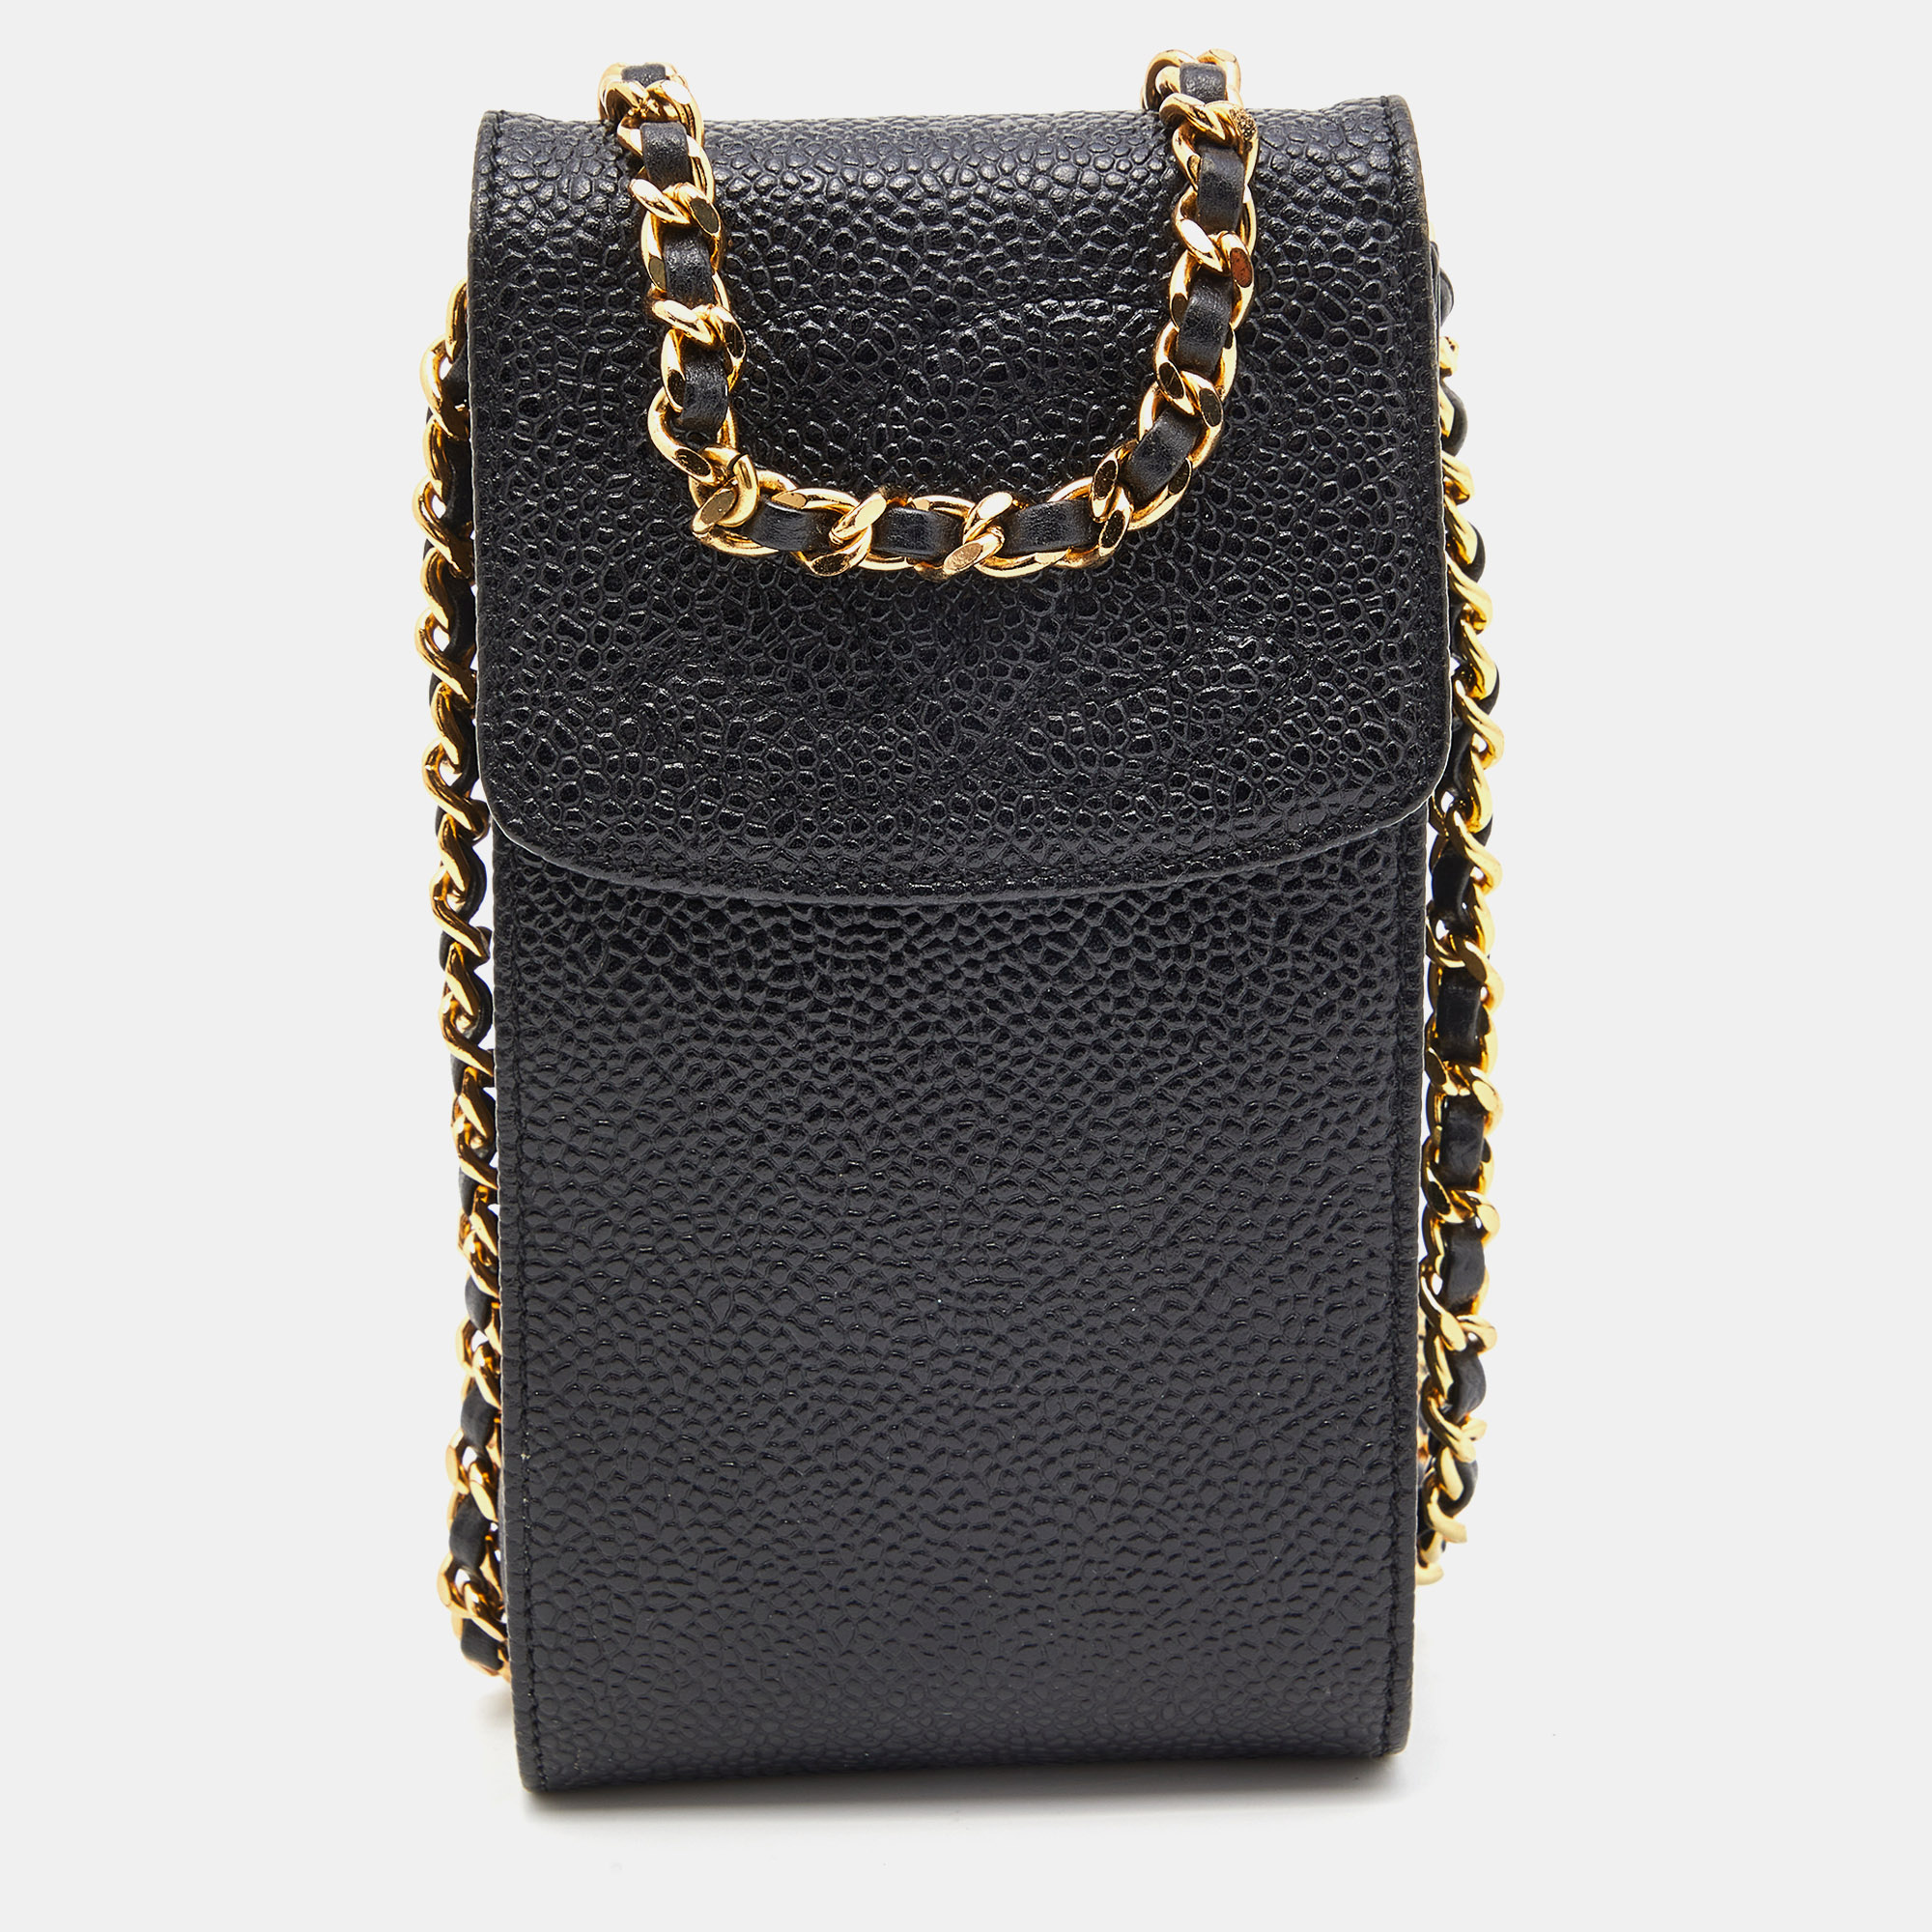 Chanel Black Caviar Quilted Leather Vintage Flap Chain Phone Case